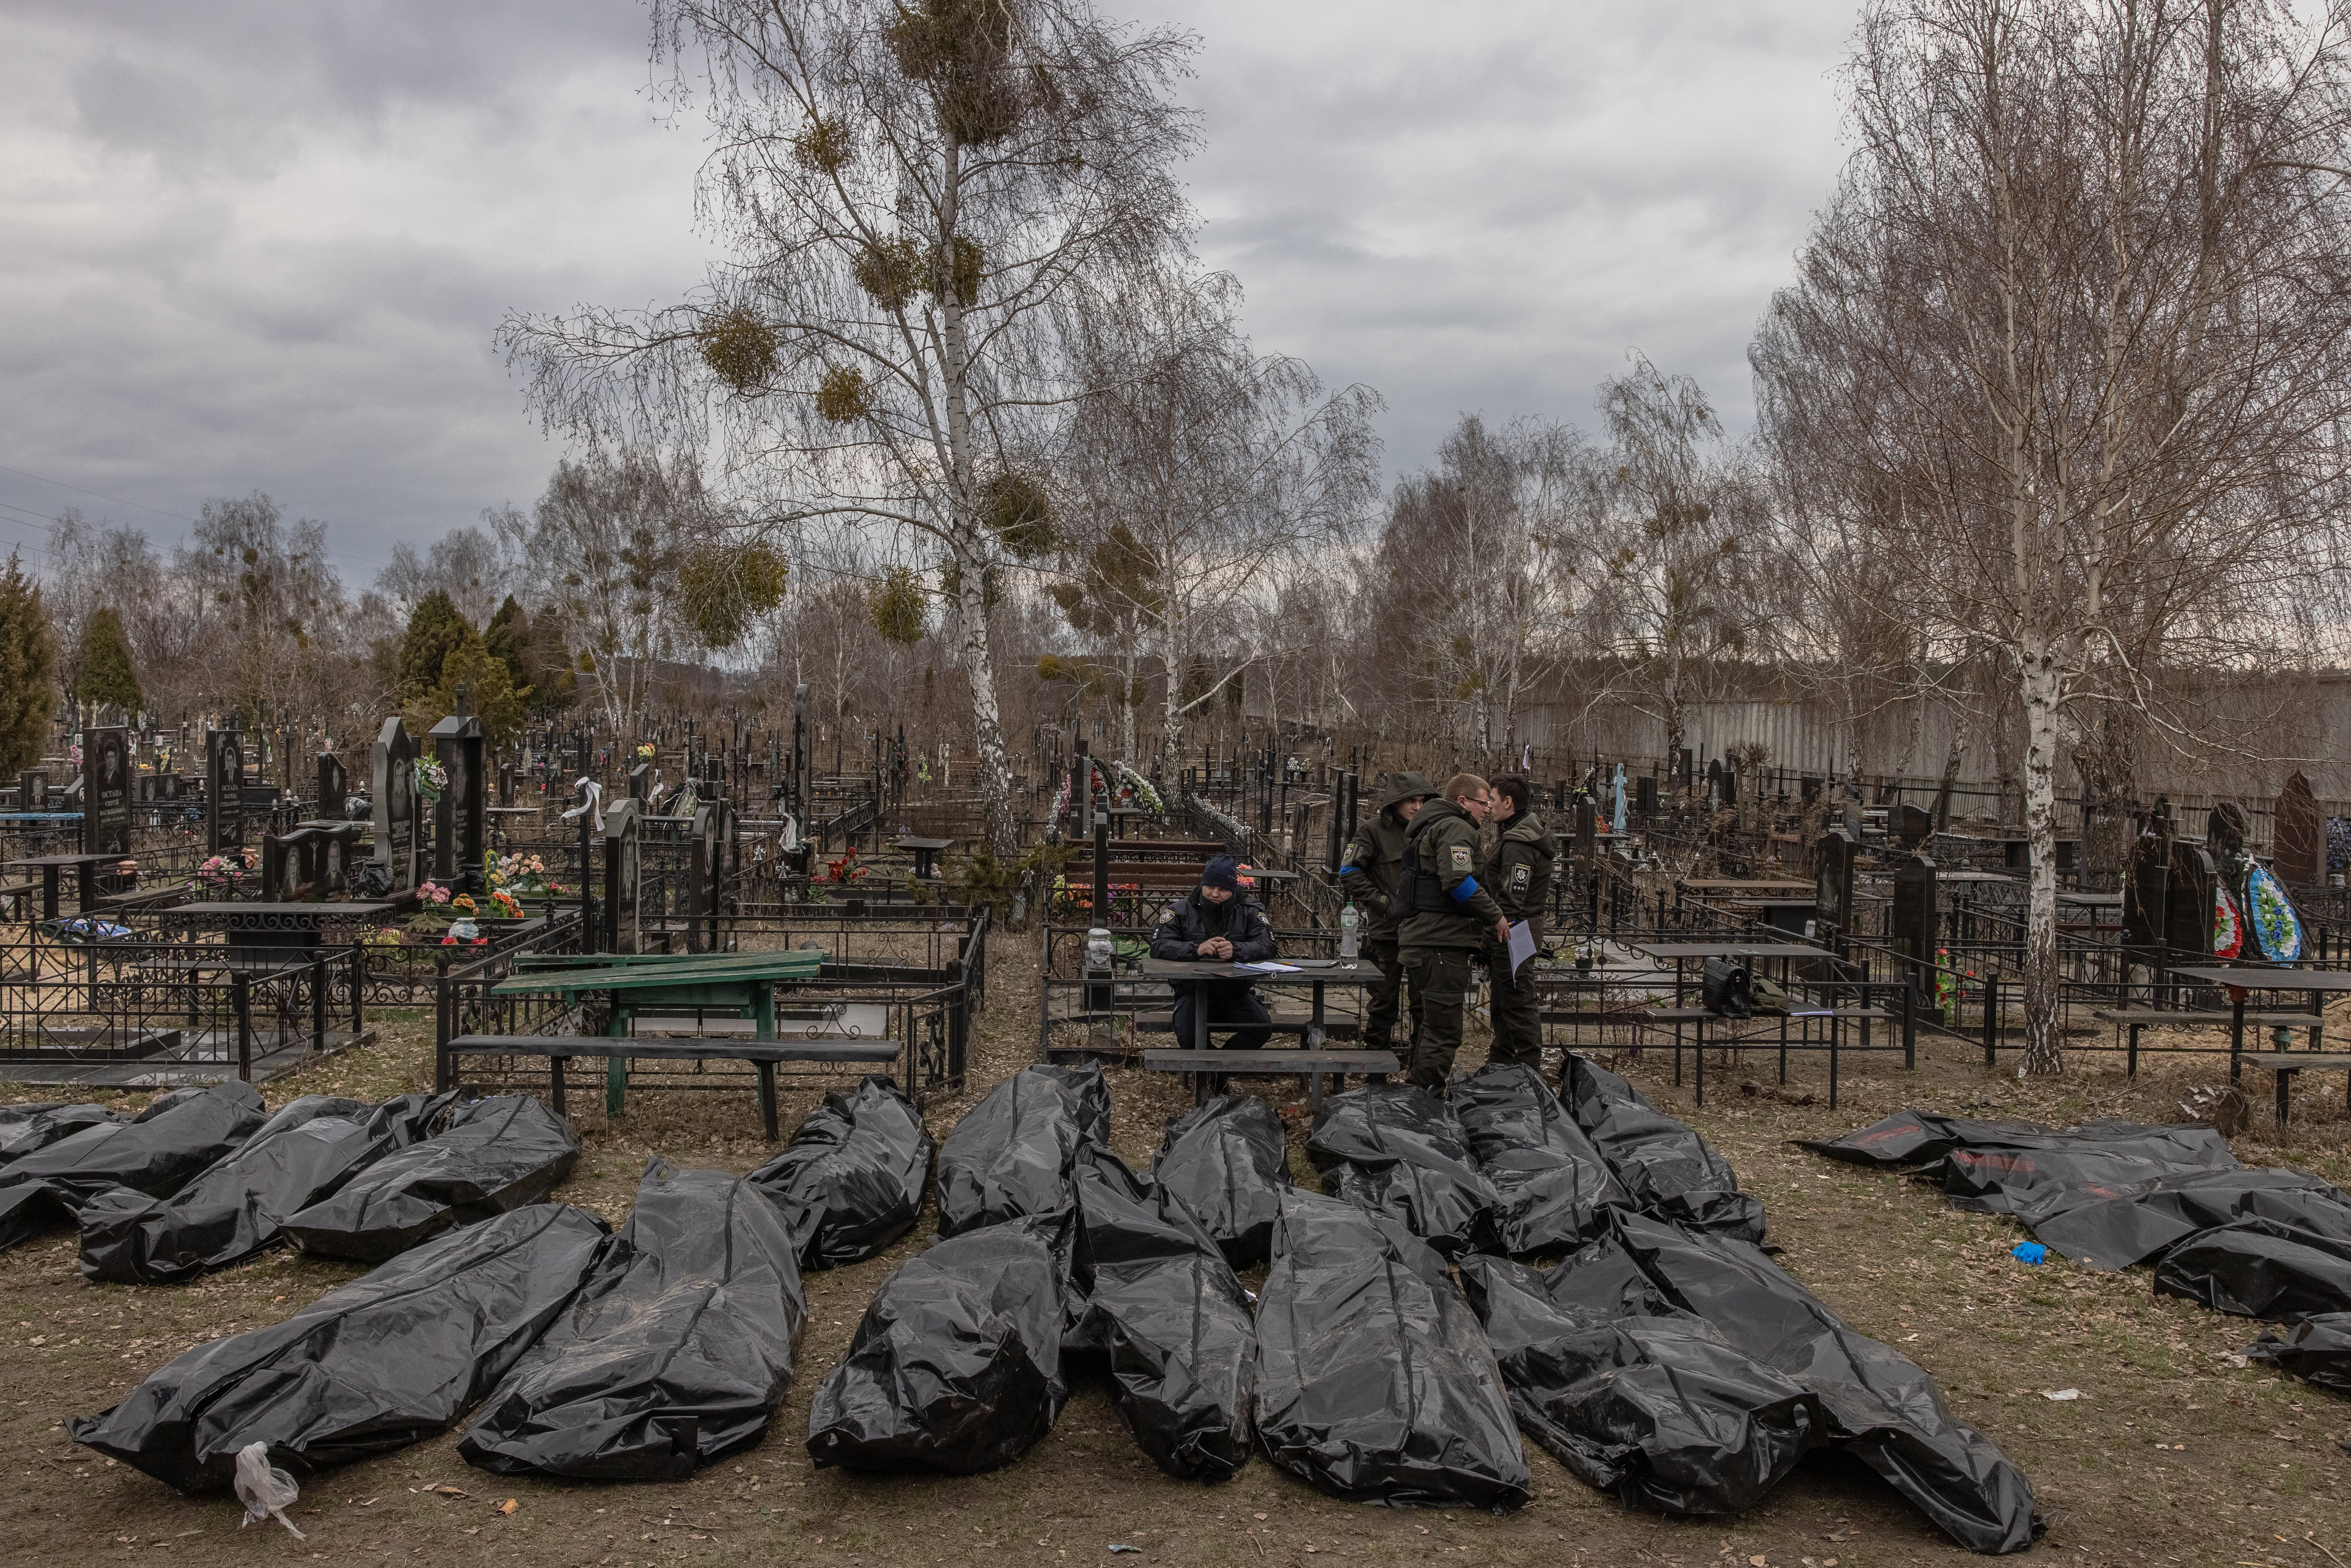 Bodies of killed people that were brought to the cemetery in Bucha